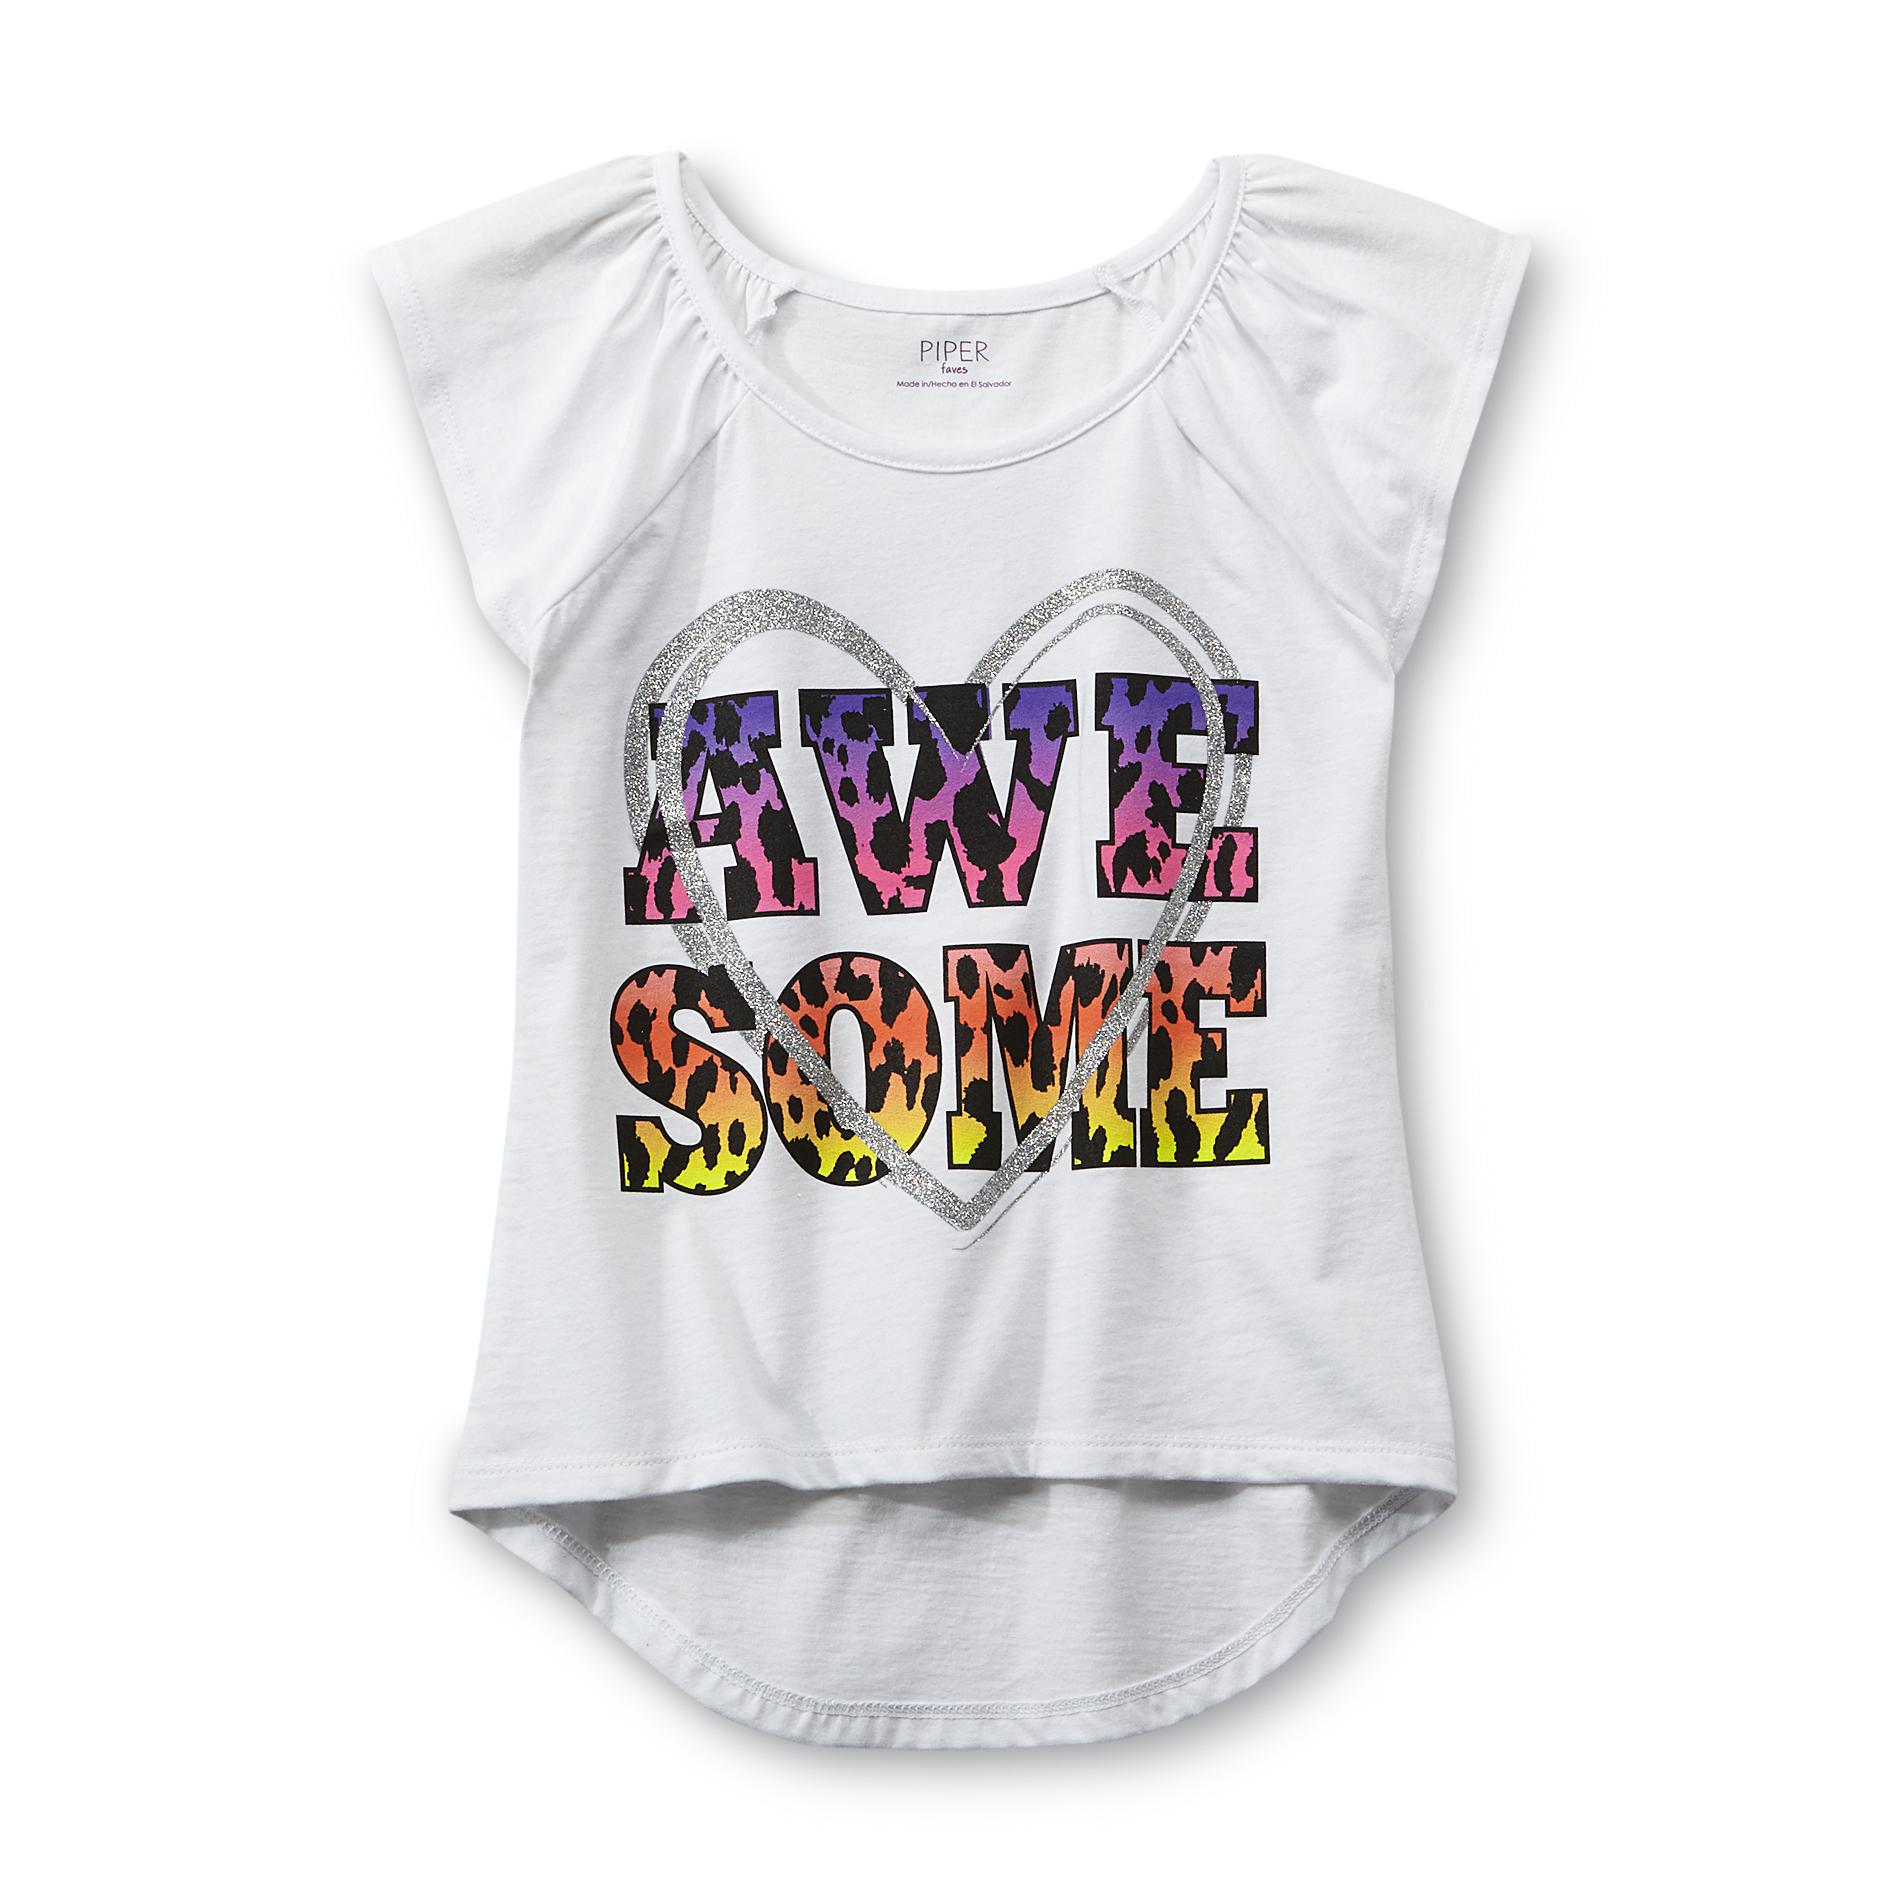 Piper Girl's High-Low Graphic T-Shirt - Awesome